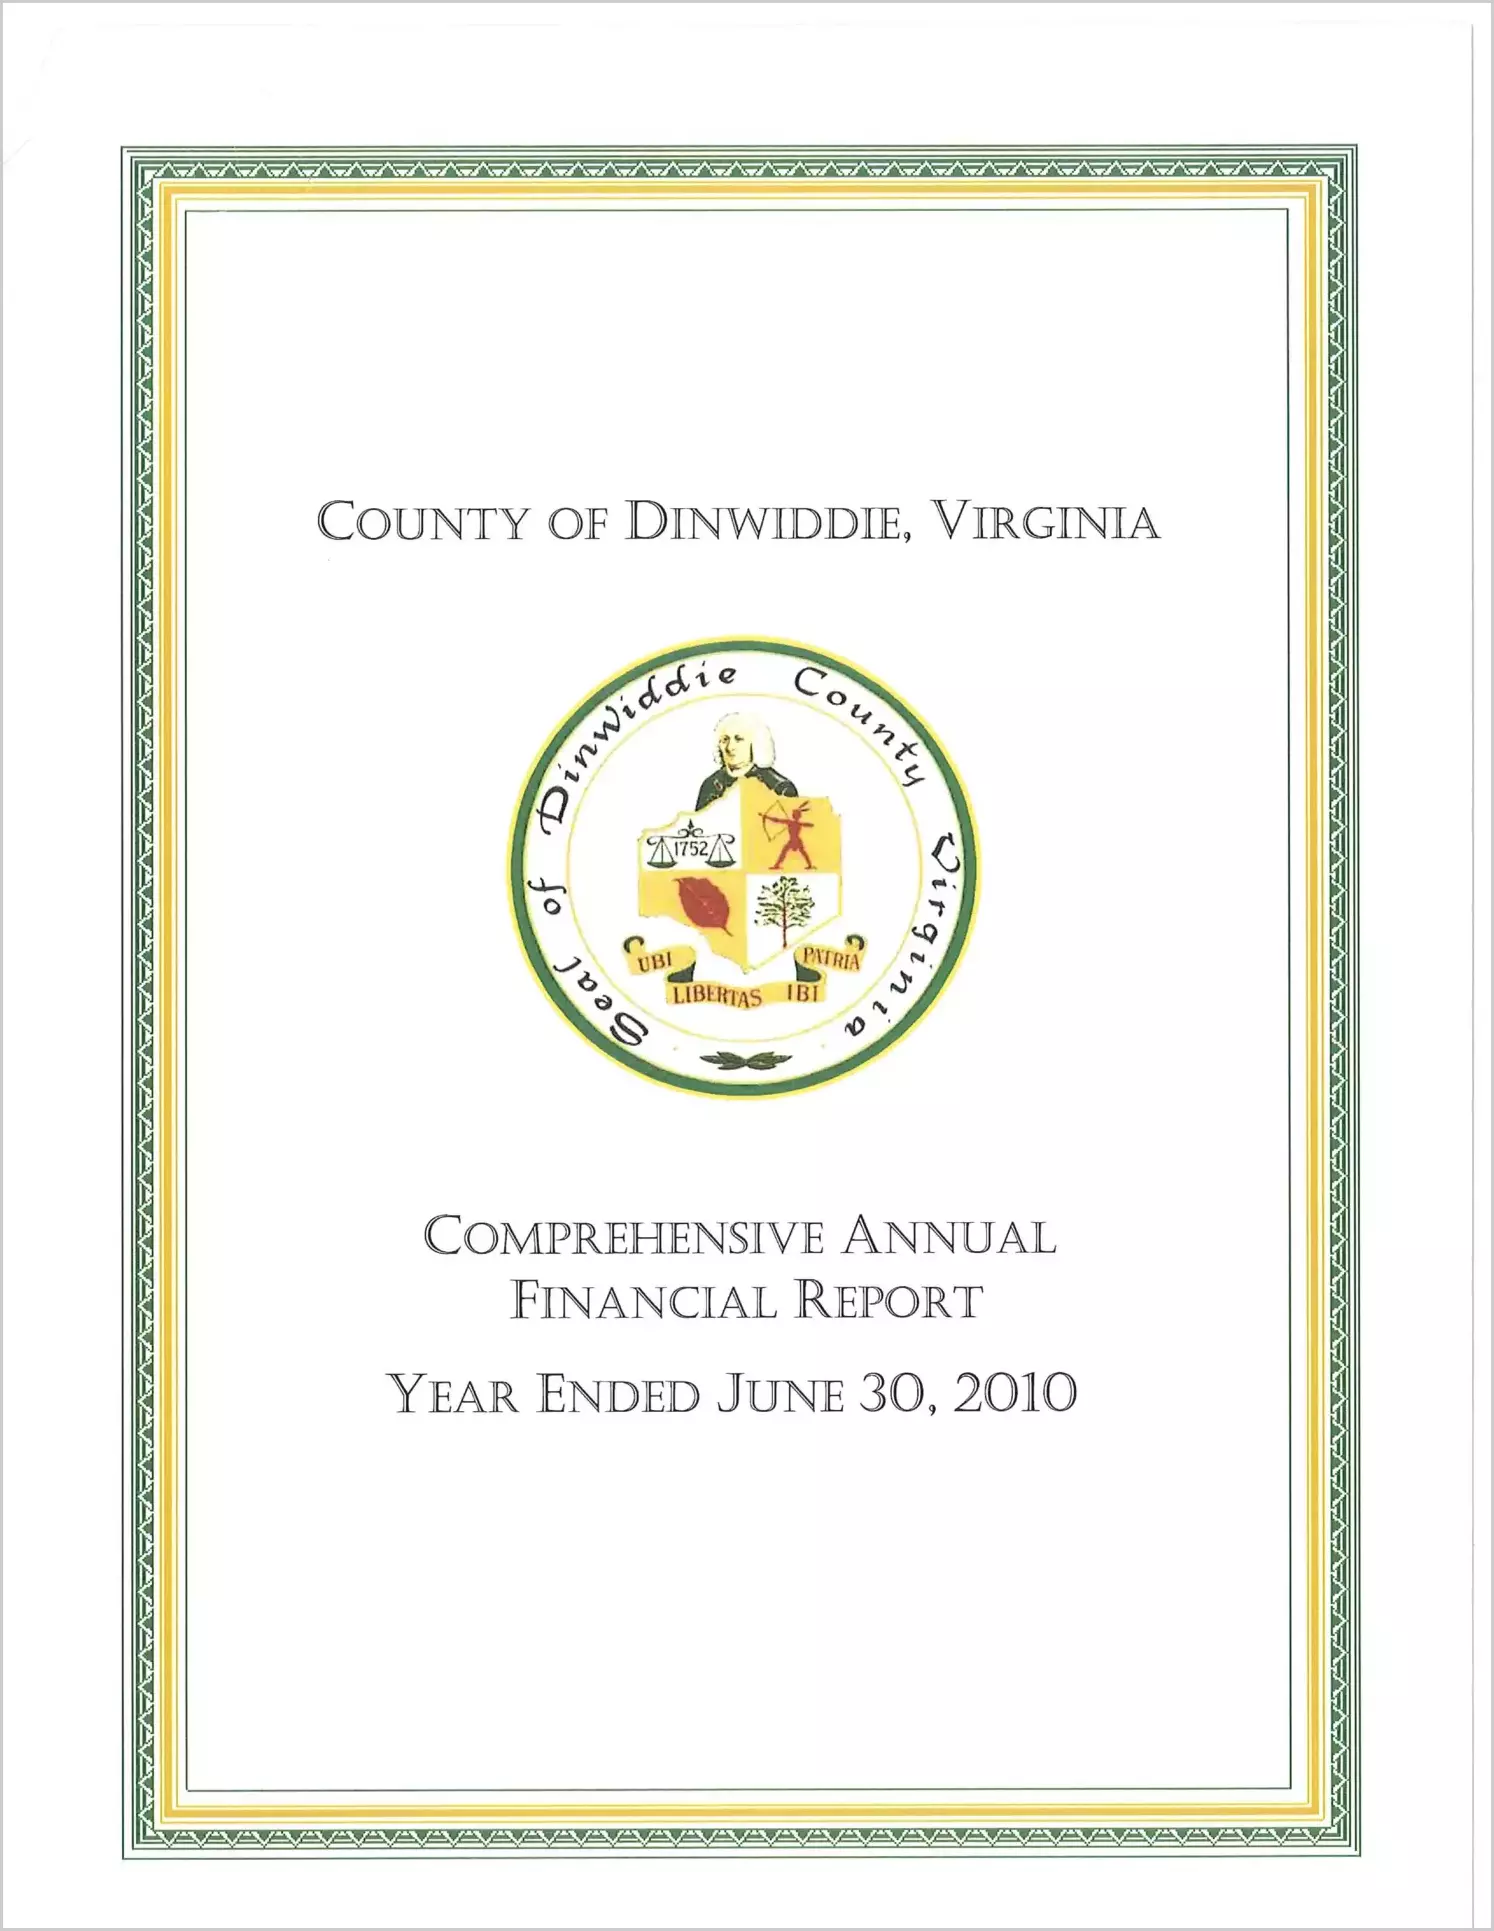 2010 Annual Financial Report for County of Dinwiddie